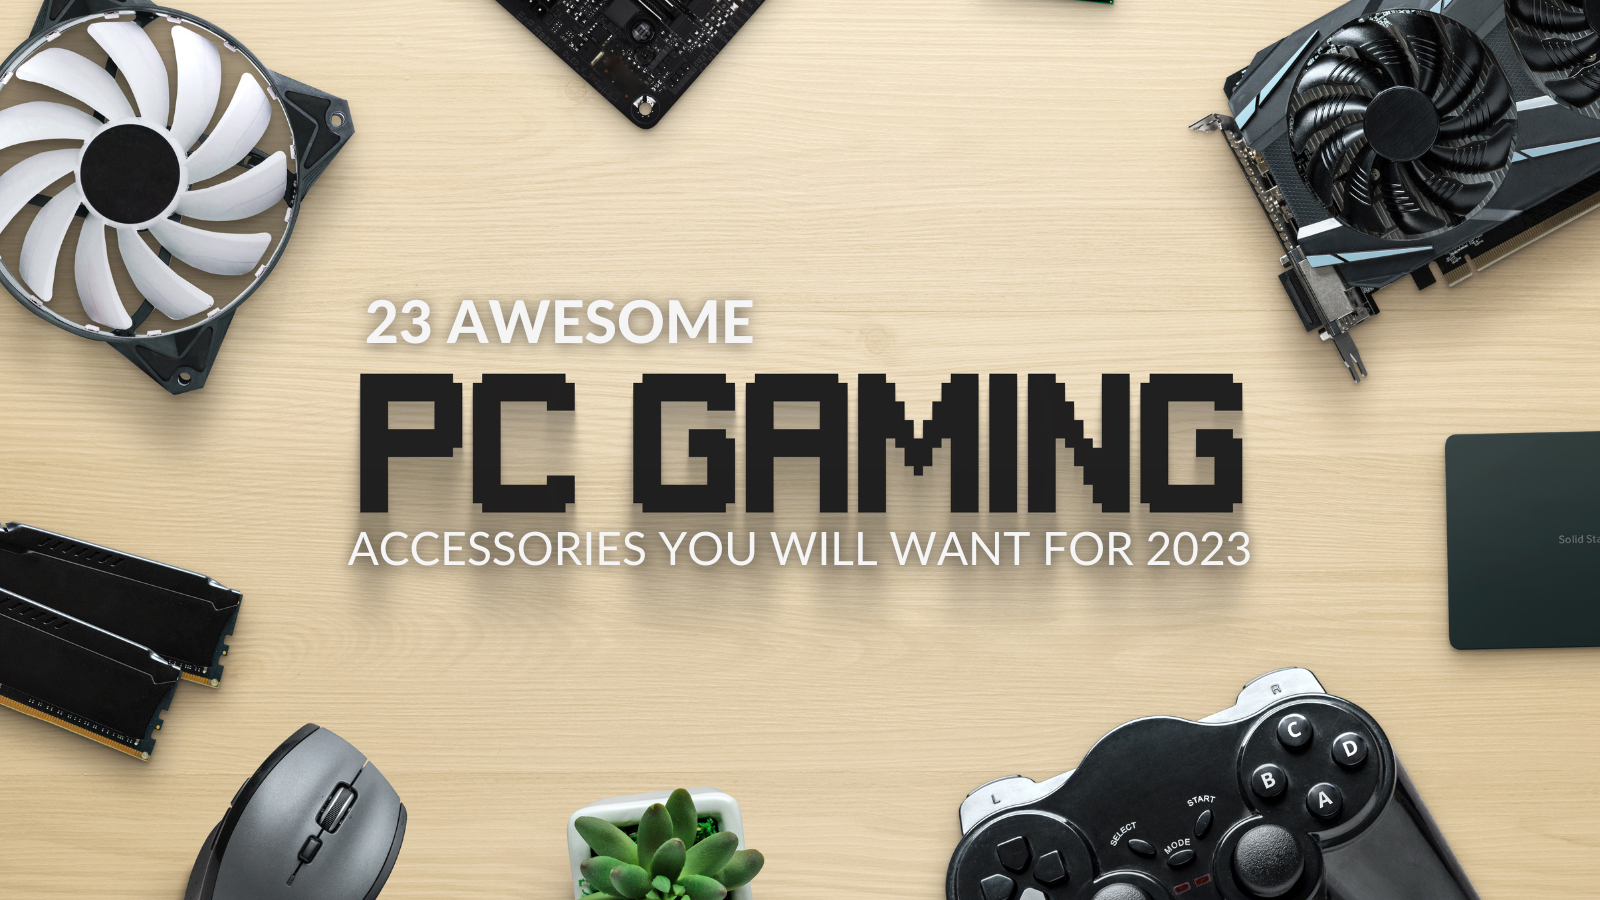 23 Awesome PC Gaming Accessories You Will Want for 2023